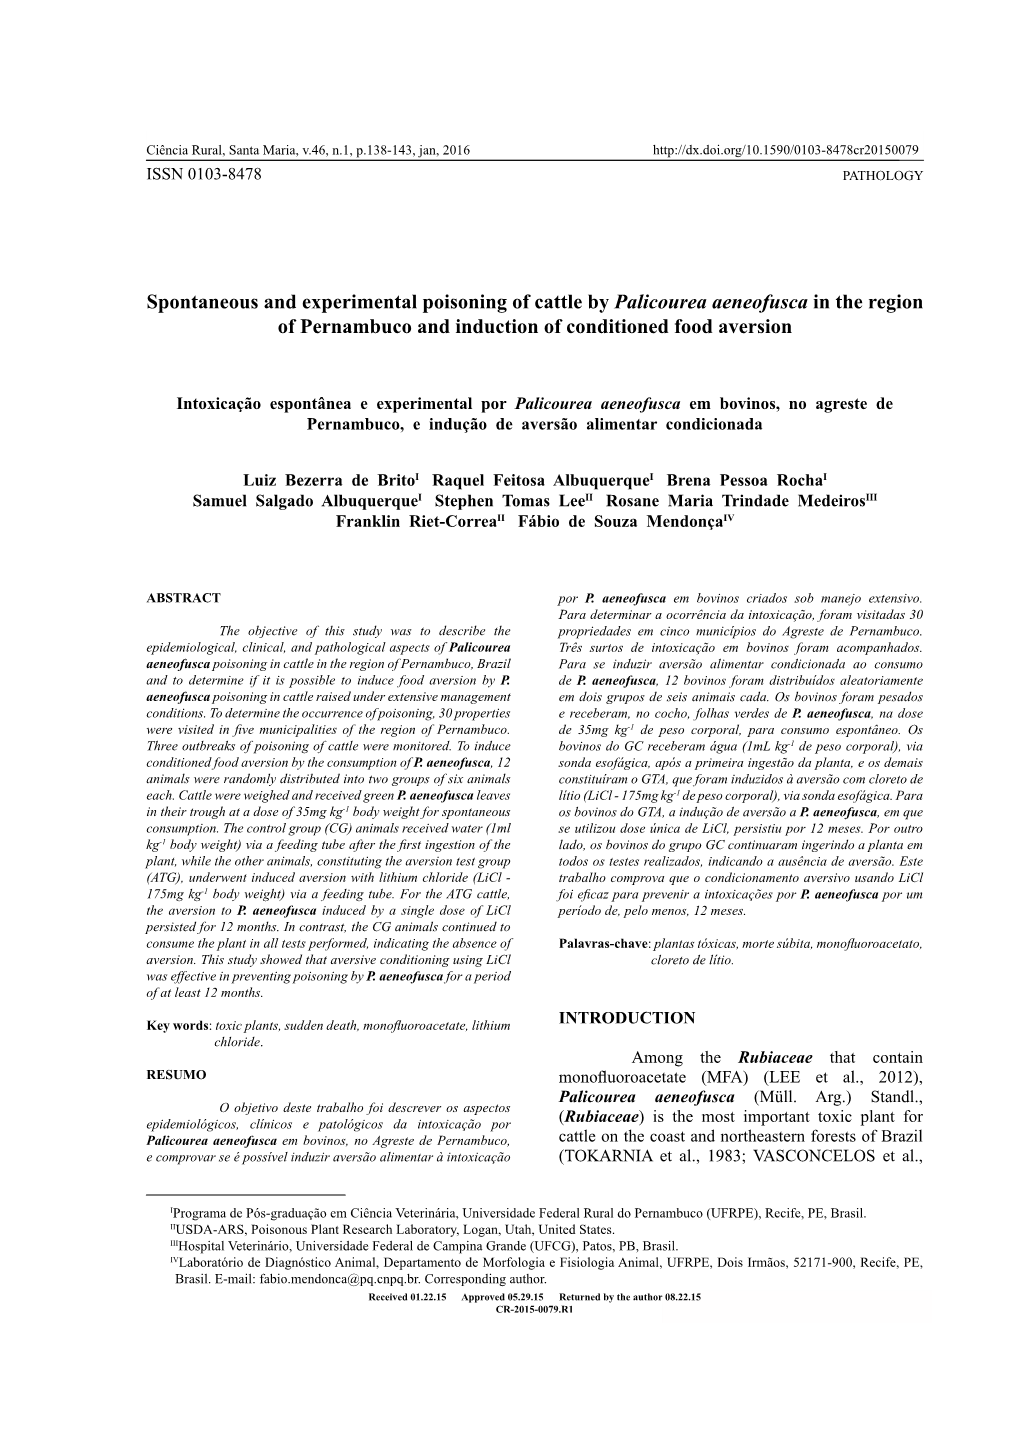 Spontaneous and Experimental Poisoning of Cattle by Palicourea Aeneofusca in the Region of Pernambuco and Induction of Conditioned Food Aversion